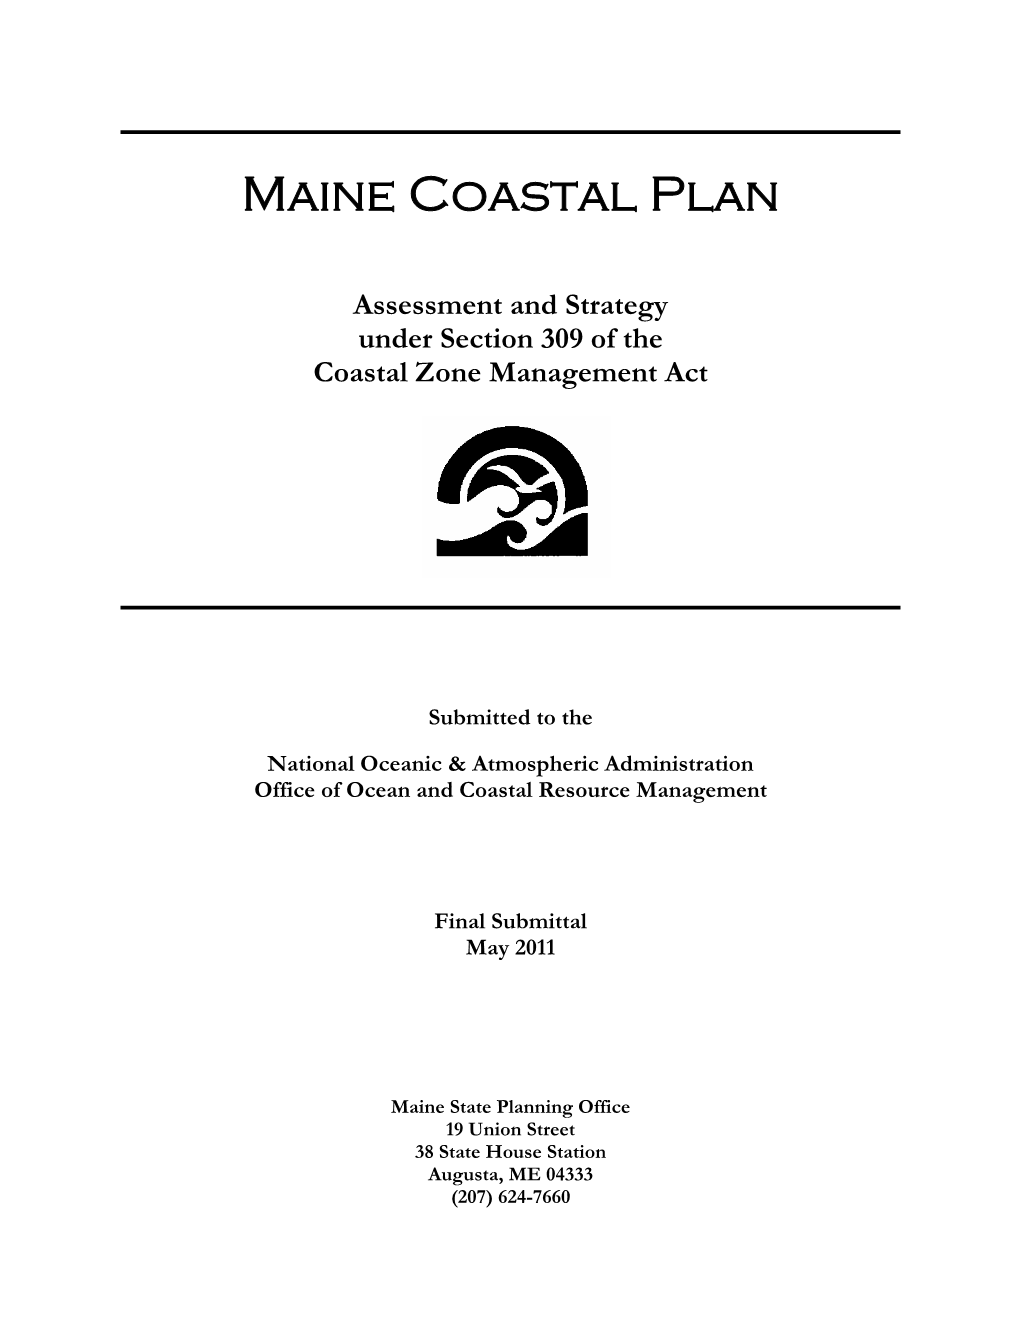 Maine Coastal Plan Assessment and Strategy